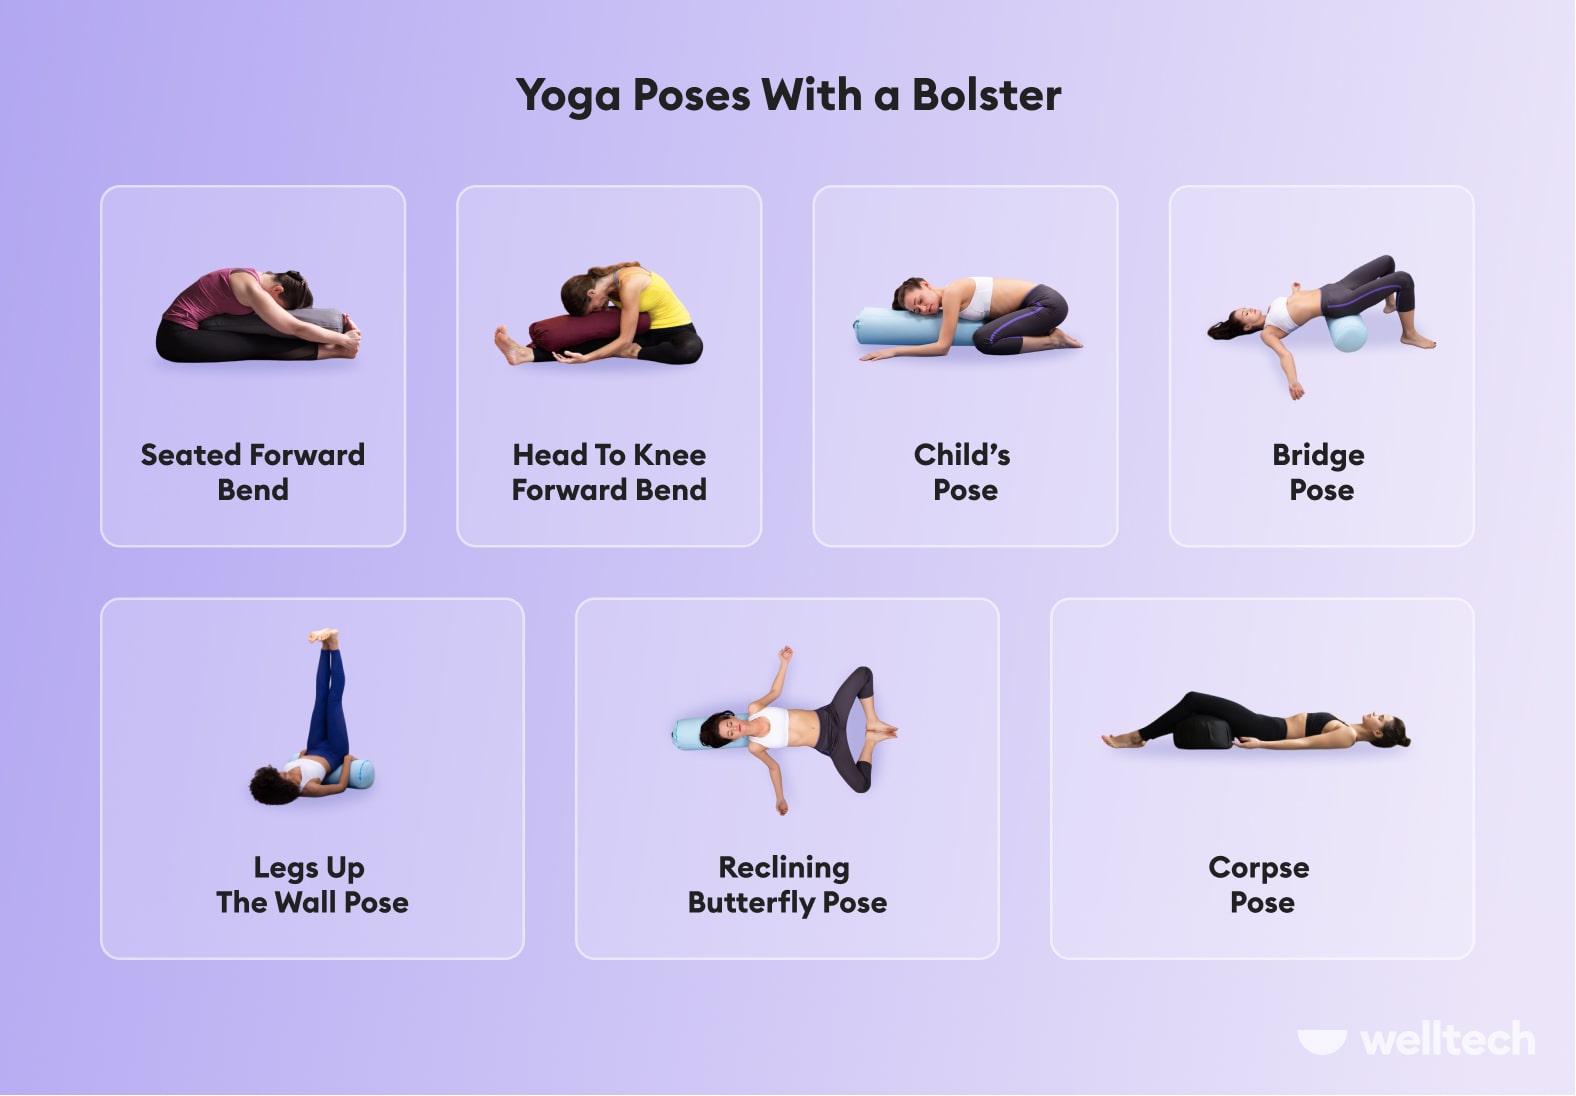 7 Yoga Poses With a Bolster For a Restorative Practice - Welltech